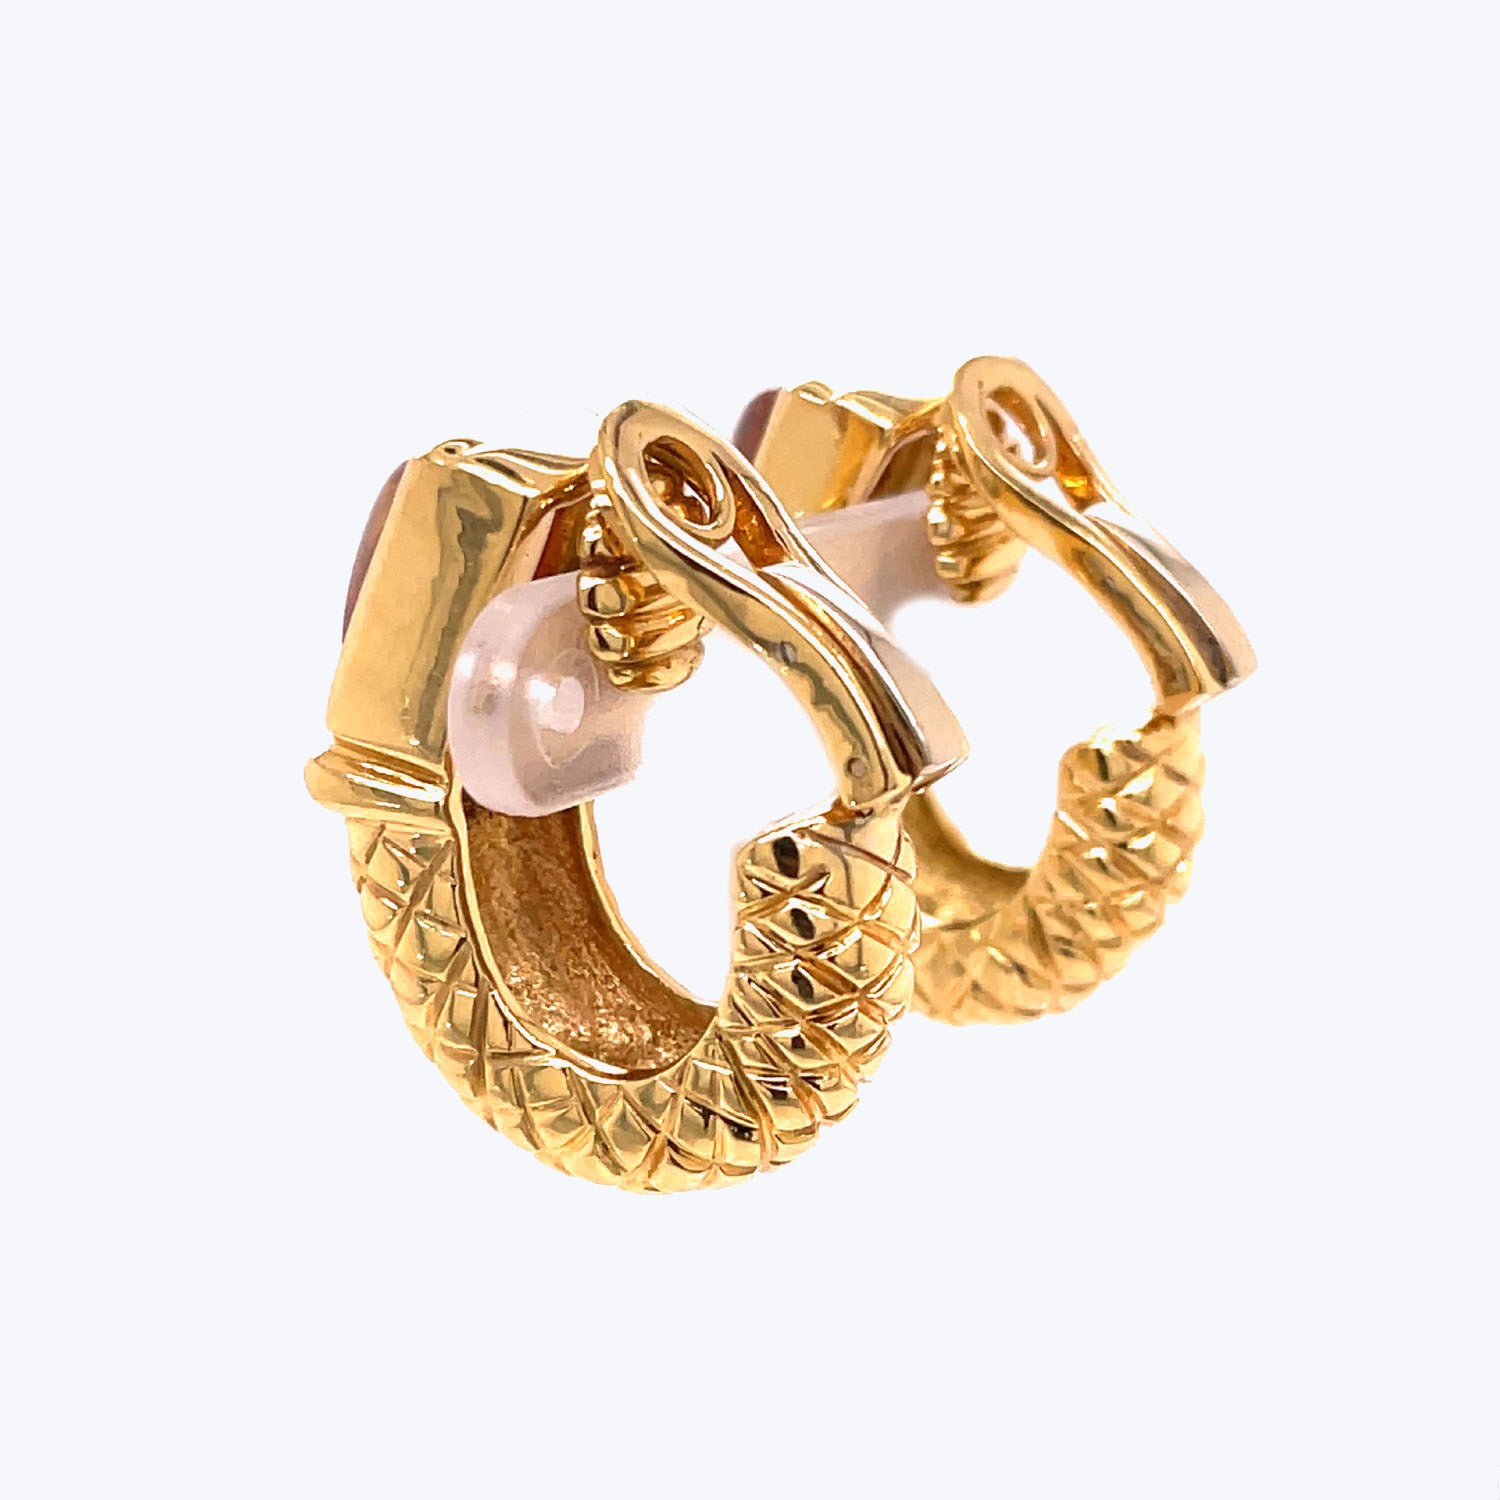 Stylish gold hoop earrings with textured surface and pearl detailing